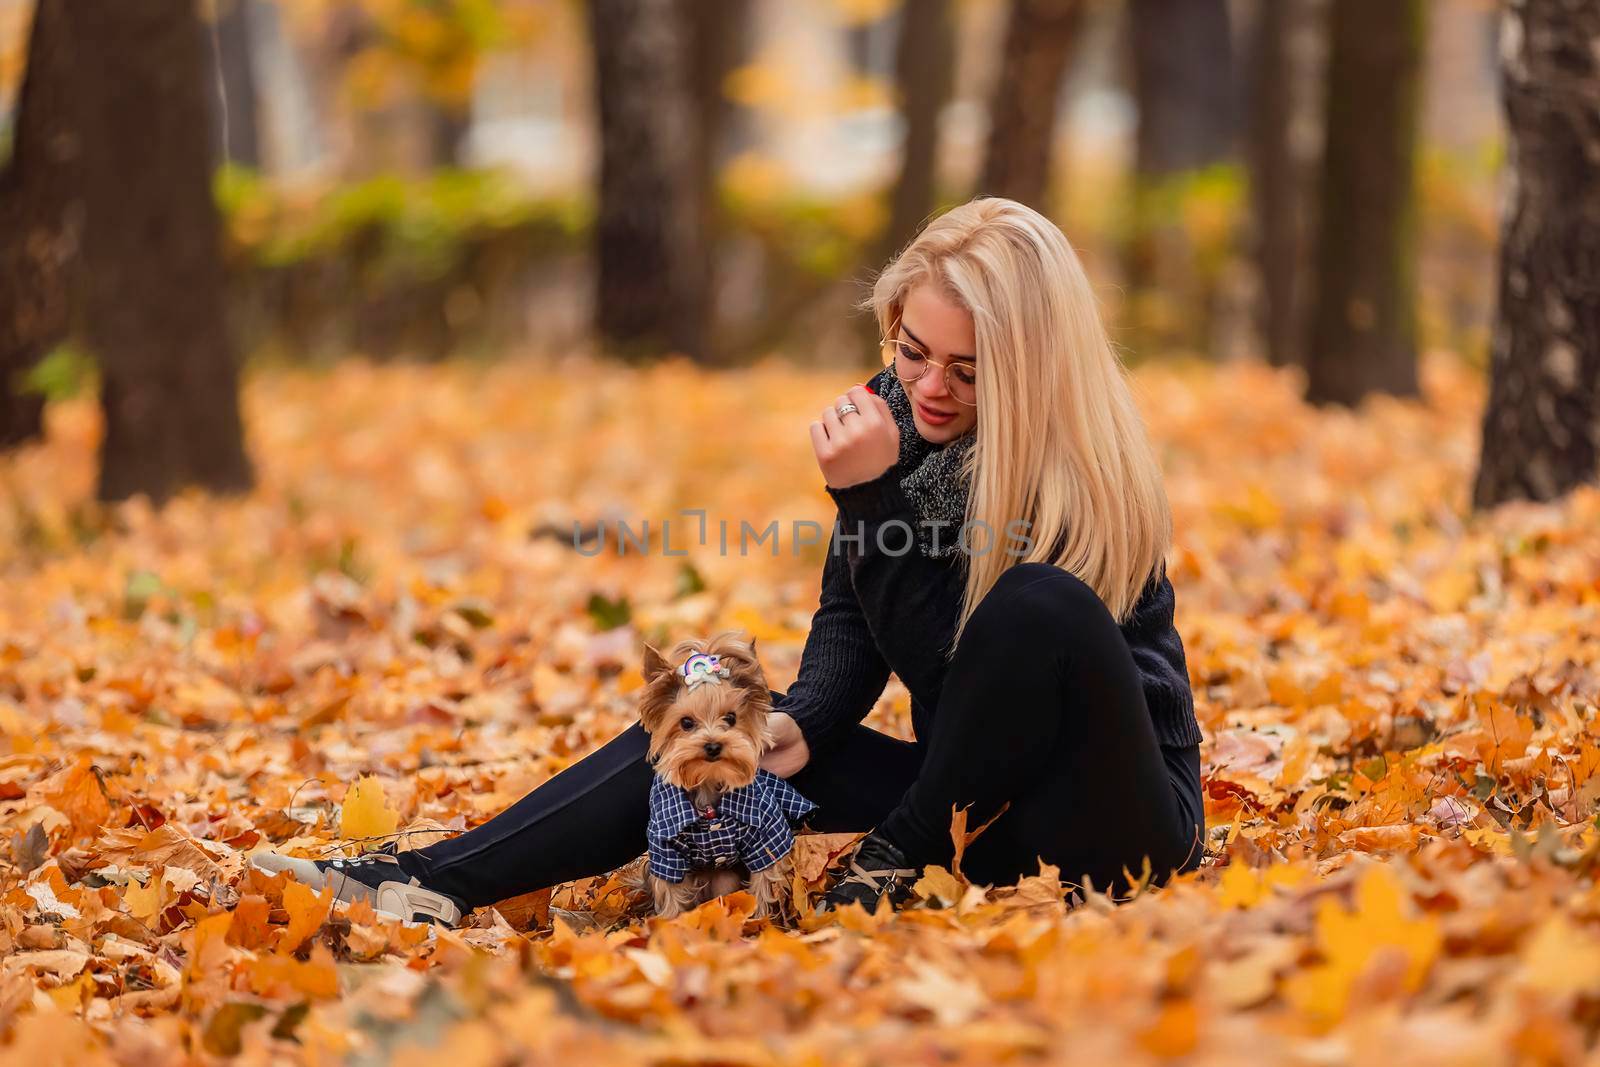 yorkshire terrier with his mistress in the autumn park